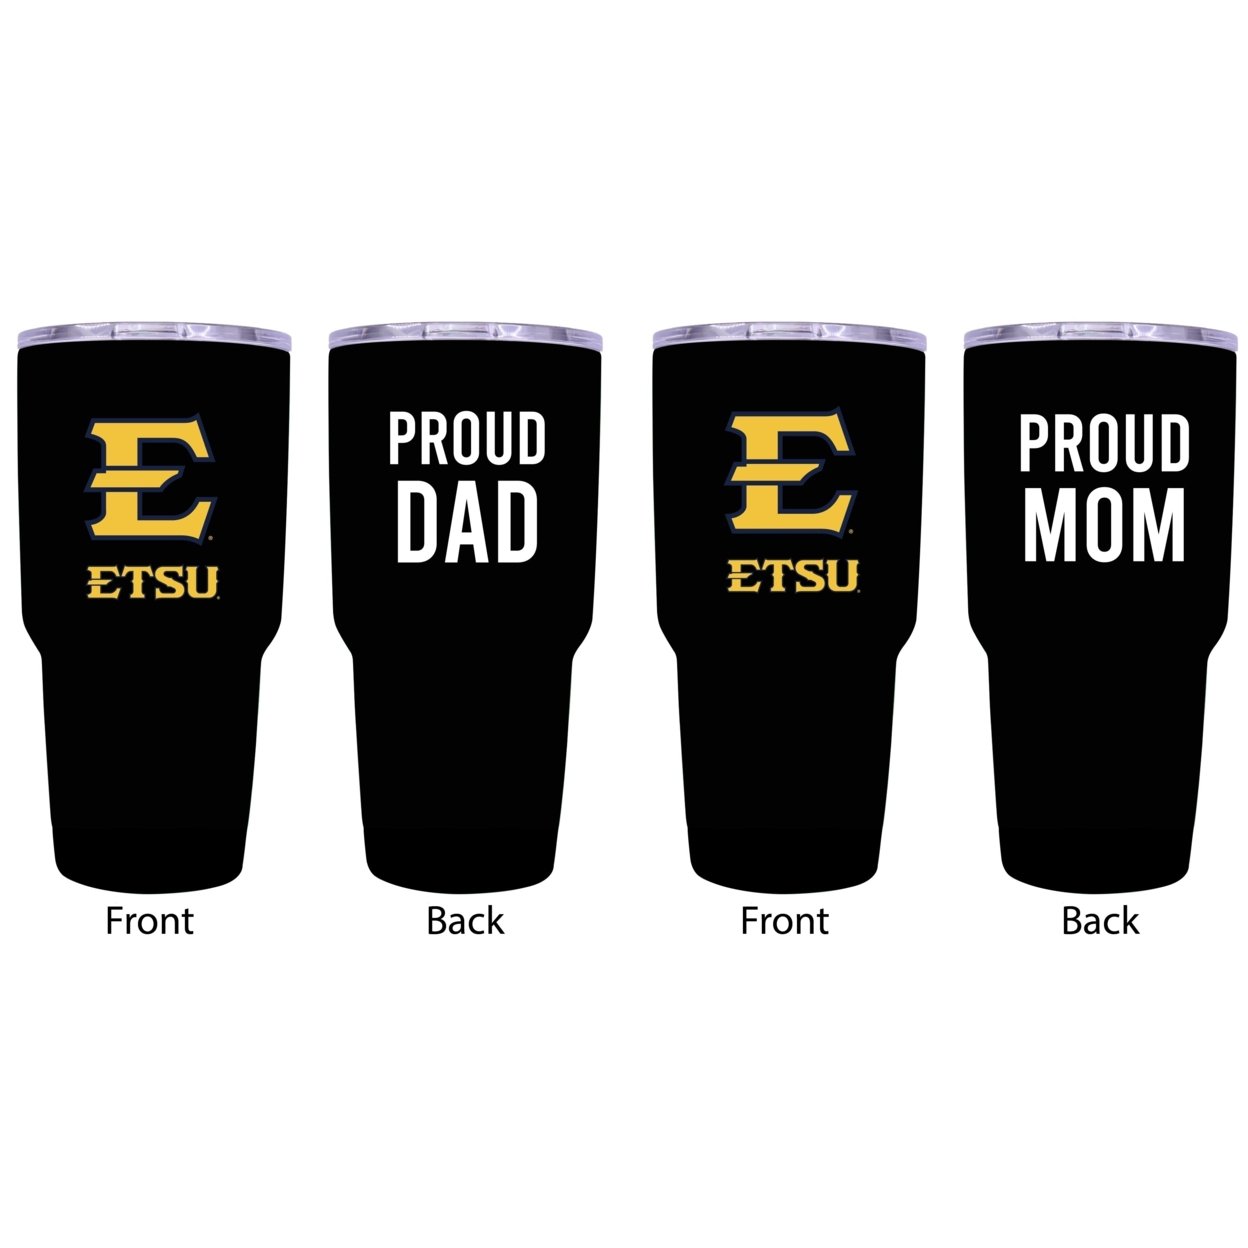 East Tennessee State University Proud Mom And Dad 24 Oz Insulated Stainless Steel Tumblers 2 Pack Black.